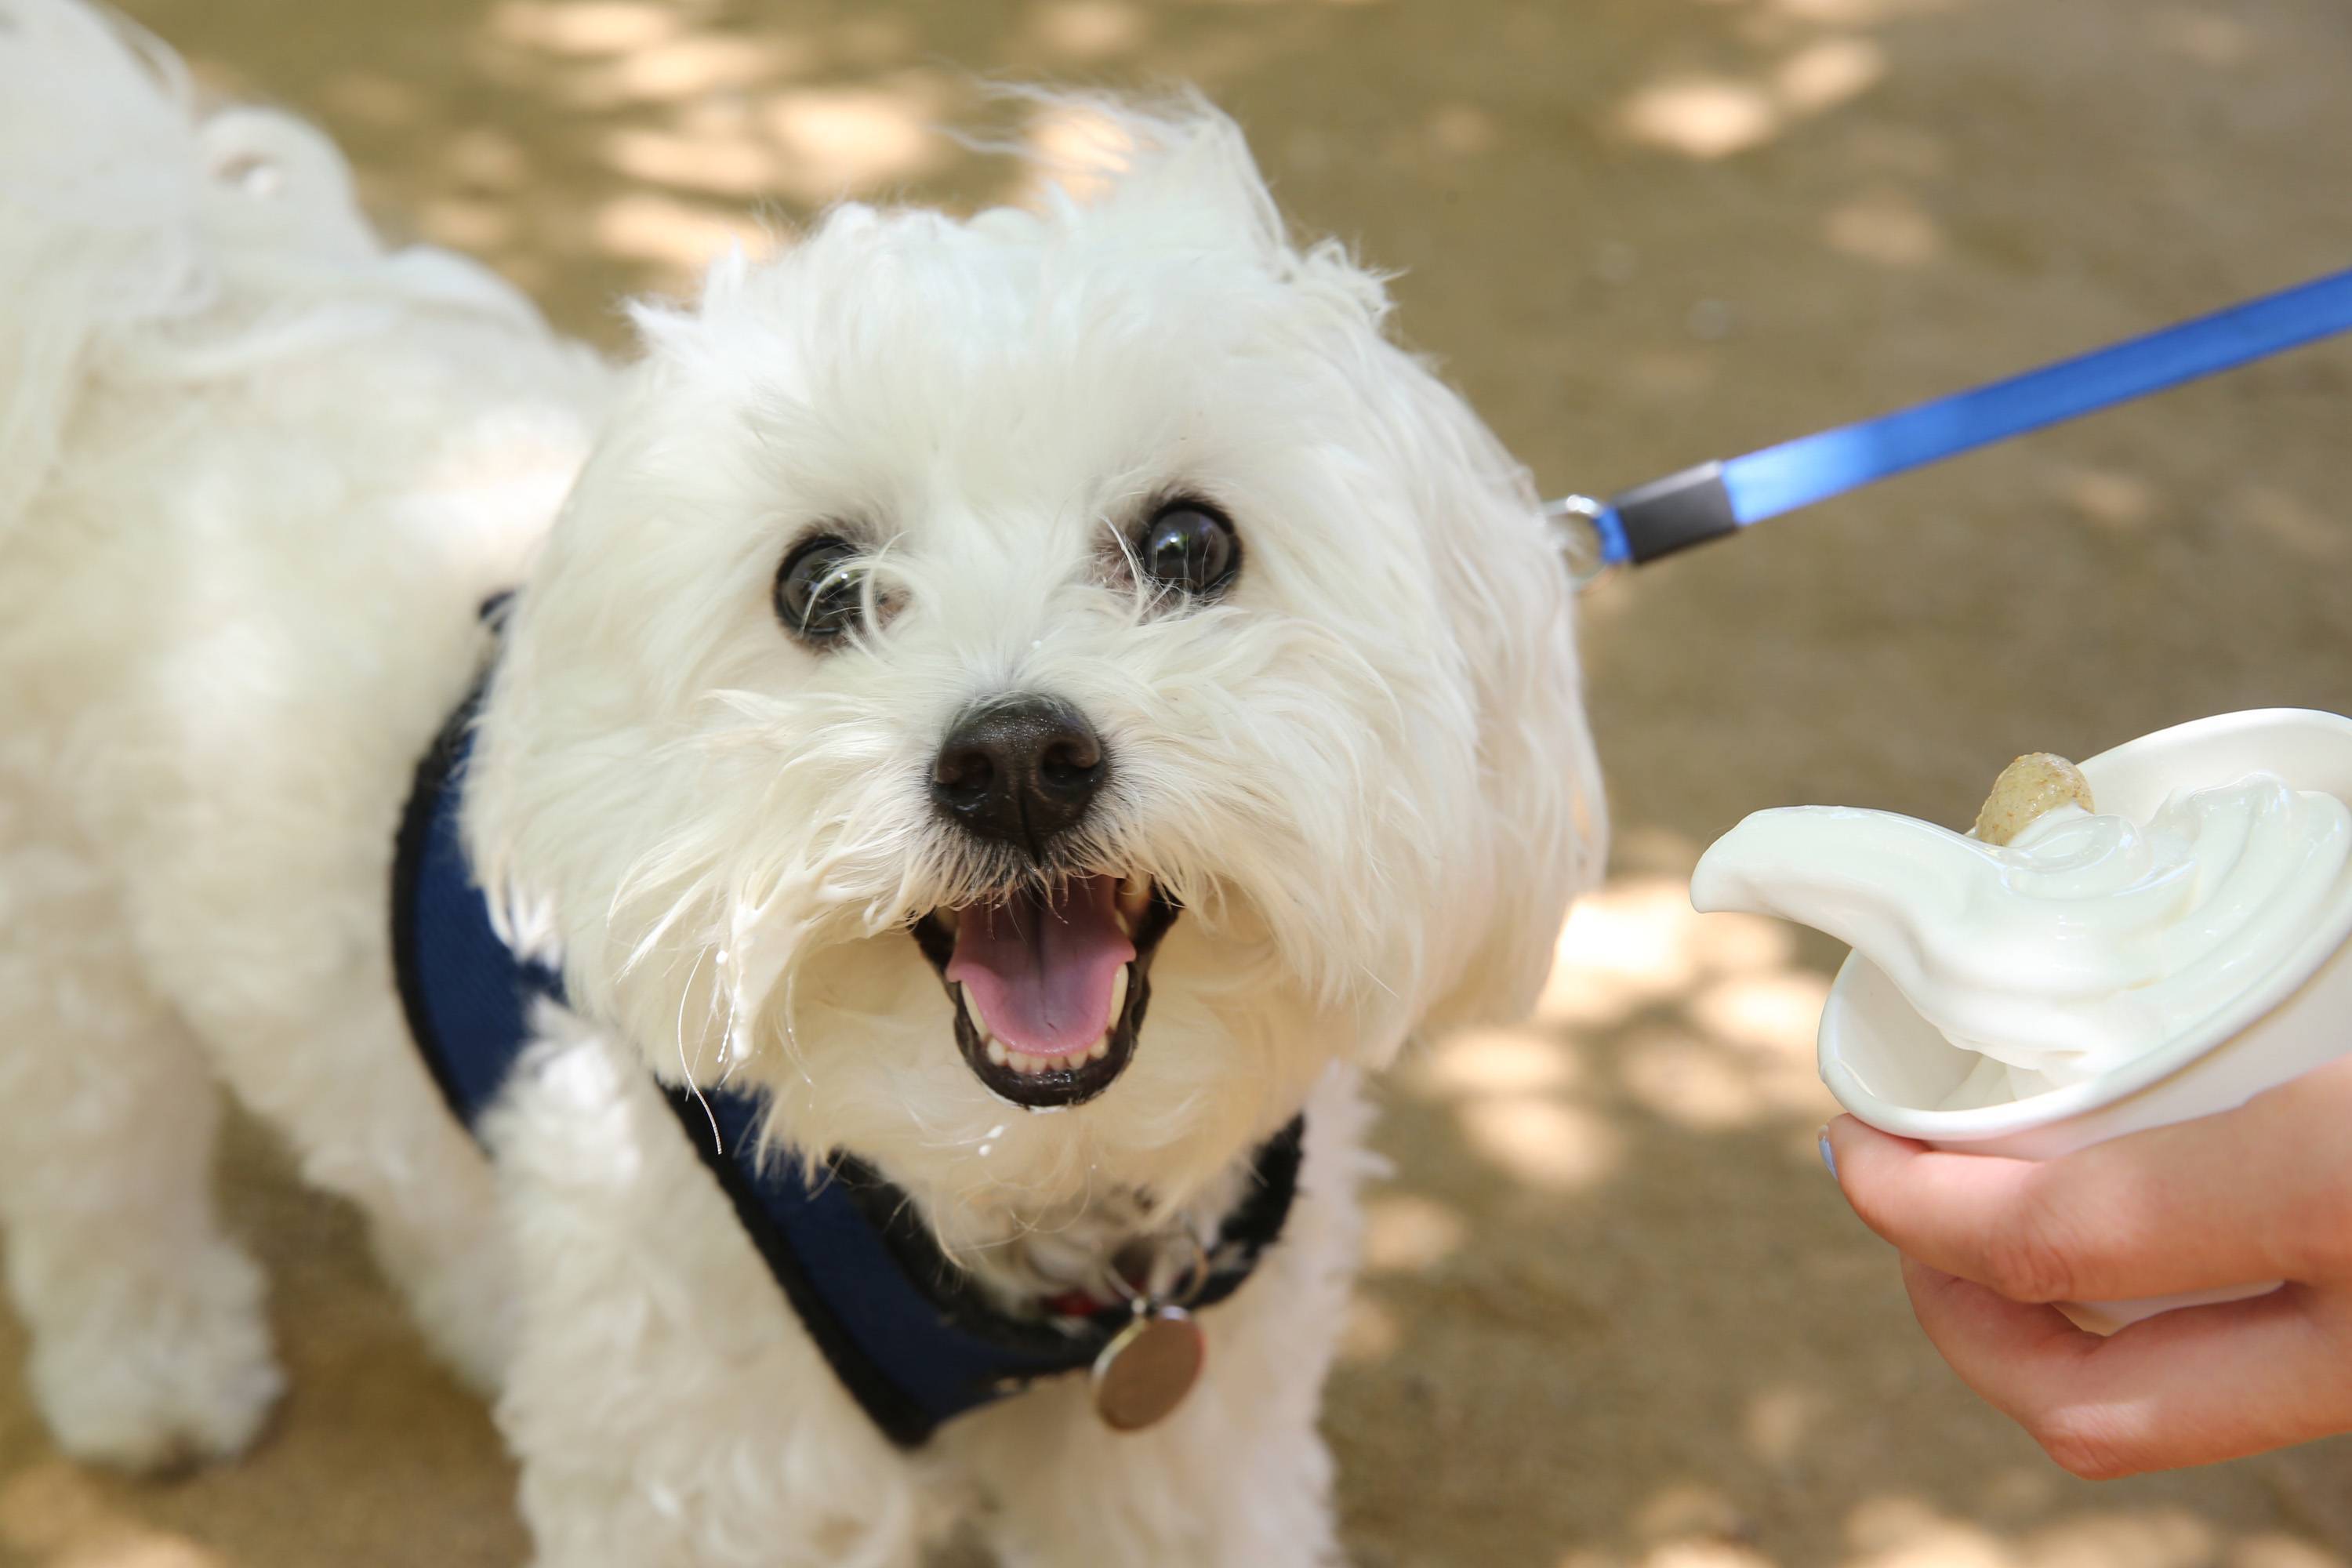 PetSmart® Expands National Ice Cream Day Celebration to Two Days, July  14-15, with Free Dog-friendly Ice Cream Samples at PetsHotel® Locations |  Business Wire